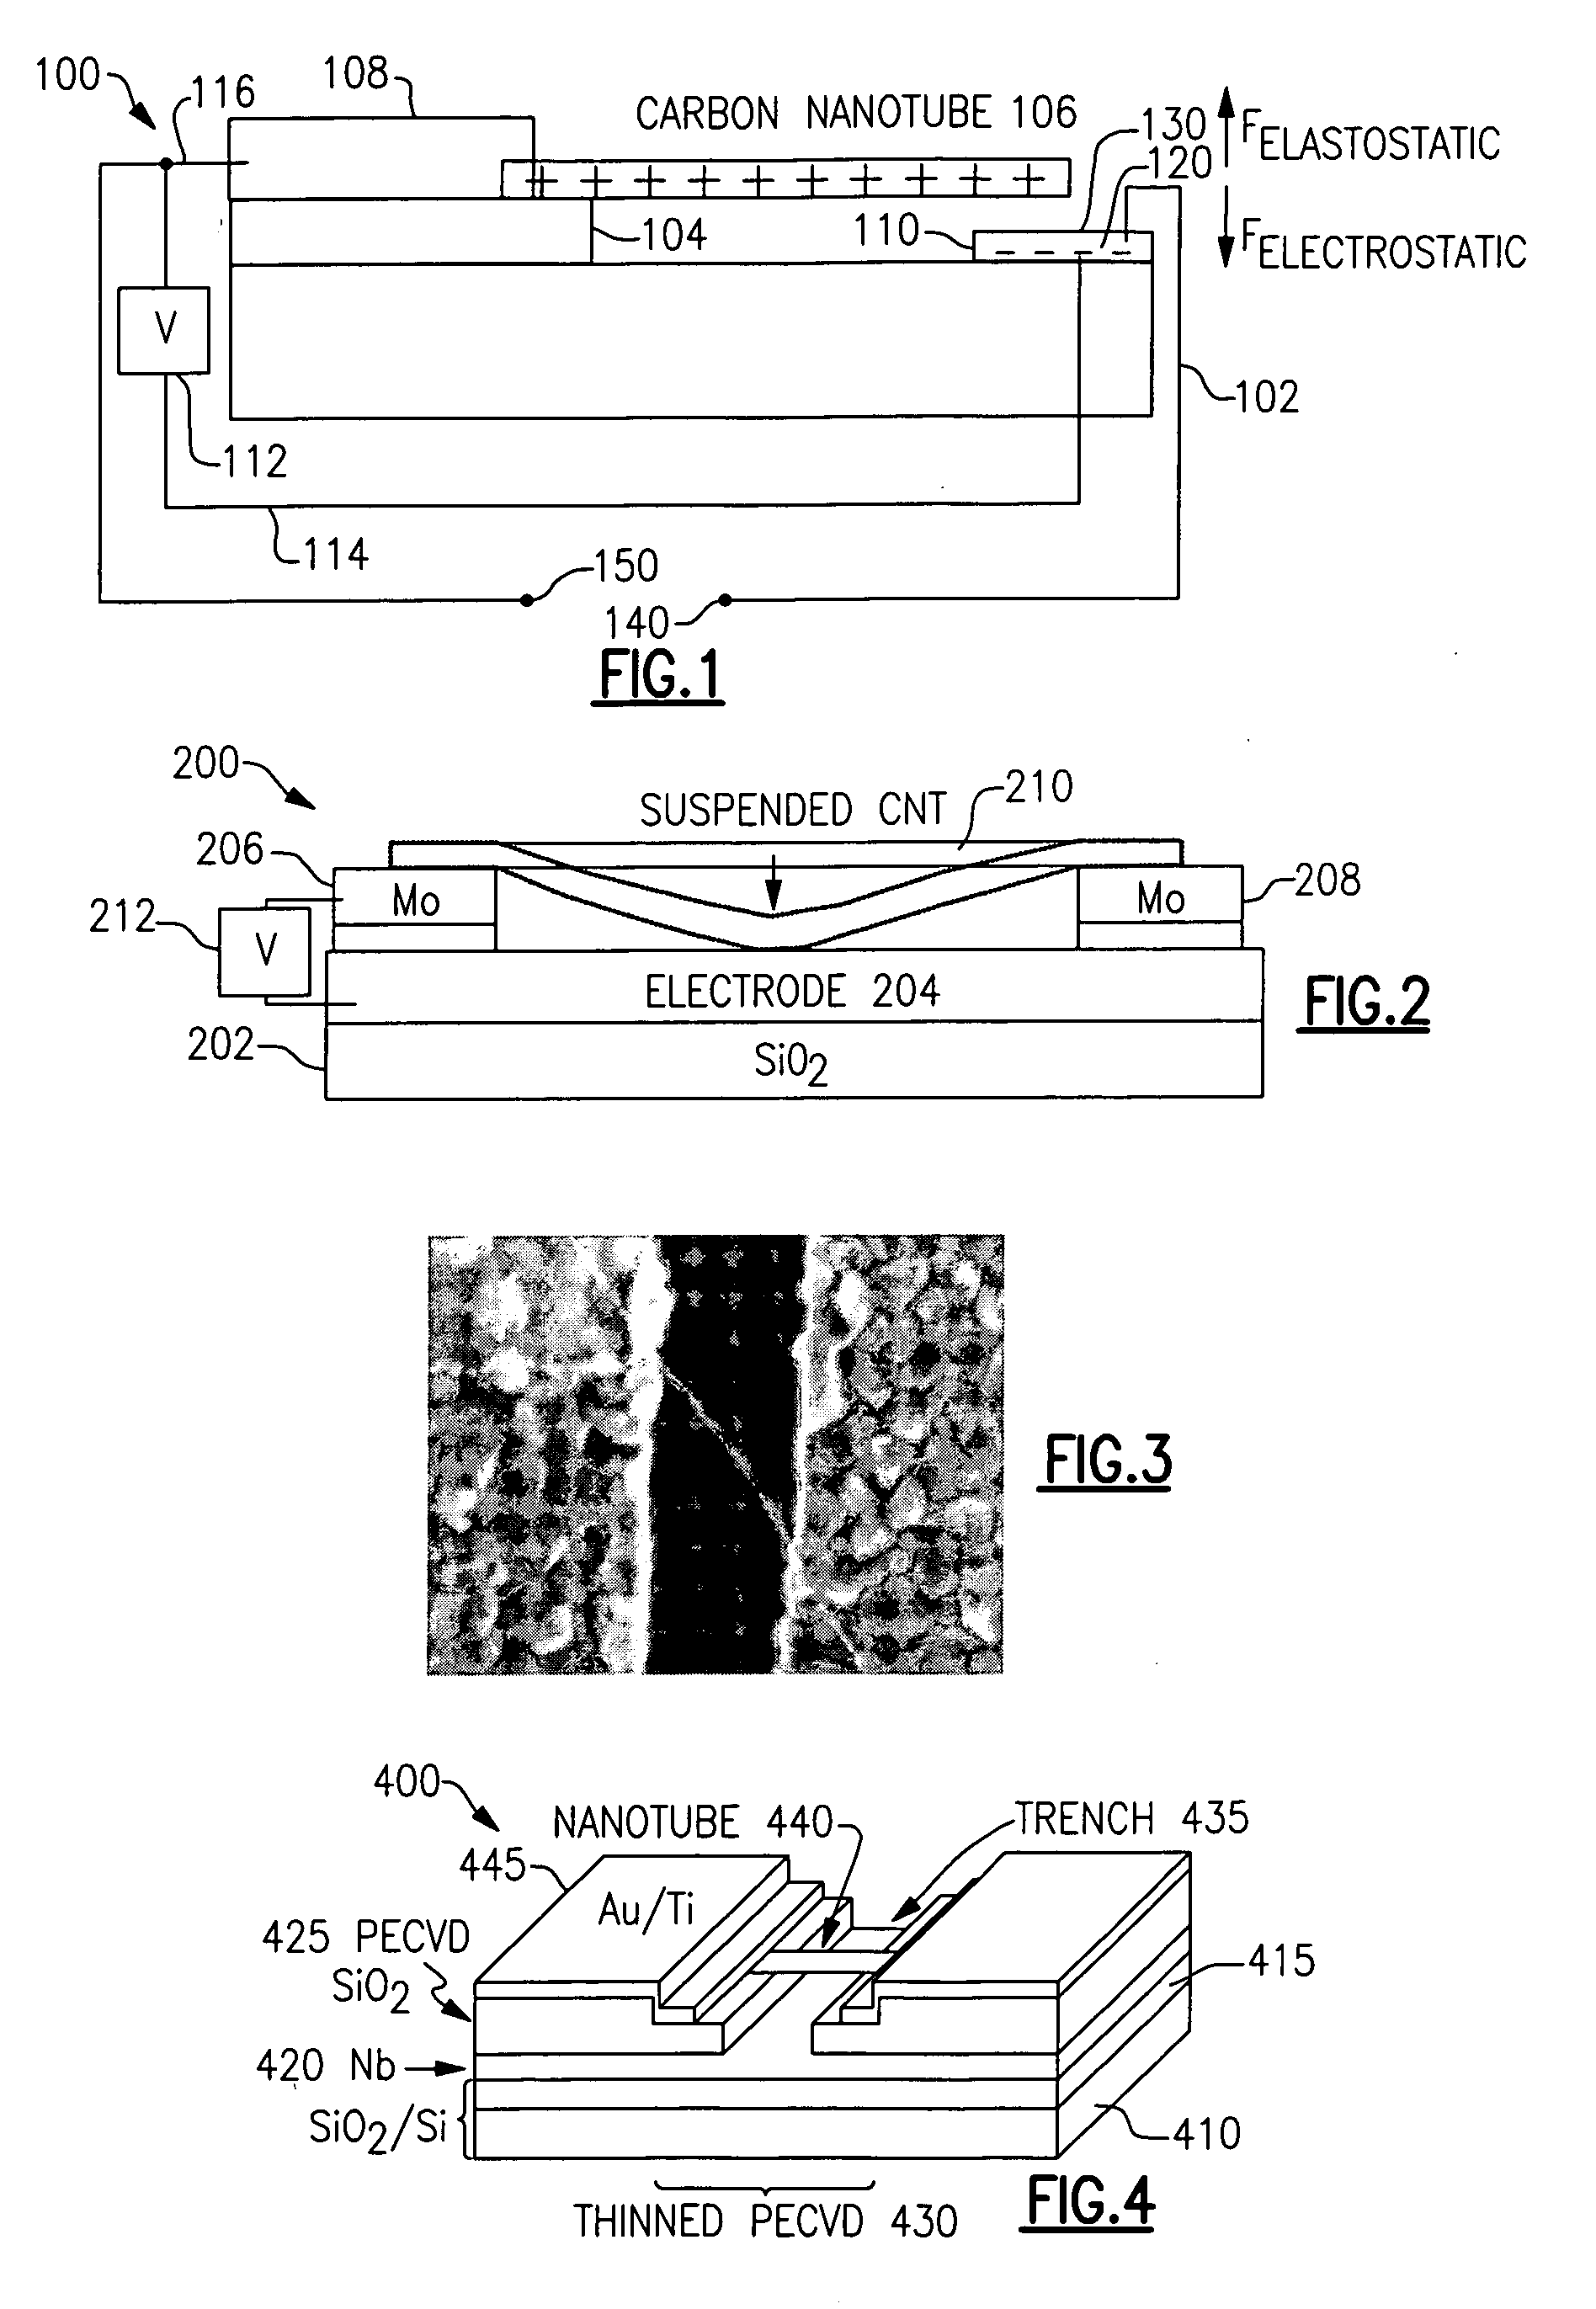 Carbon nanotube switches for memory, RF communications and sensing applications, and methods of making the same